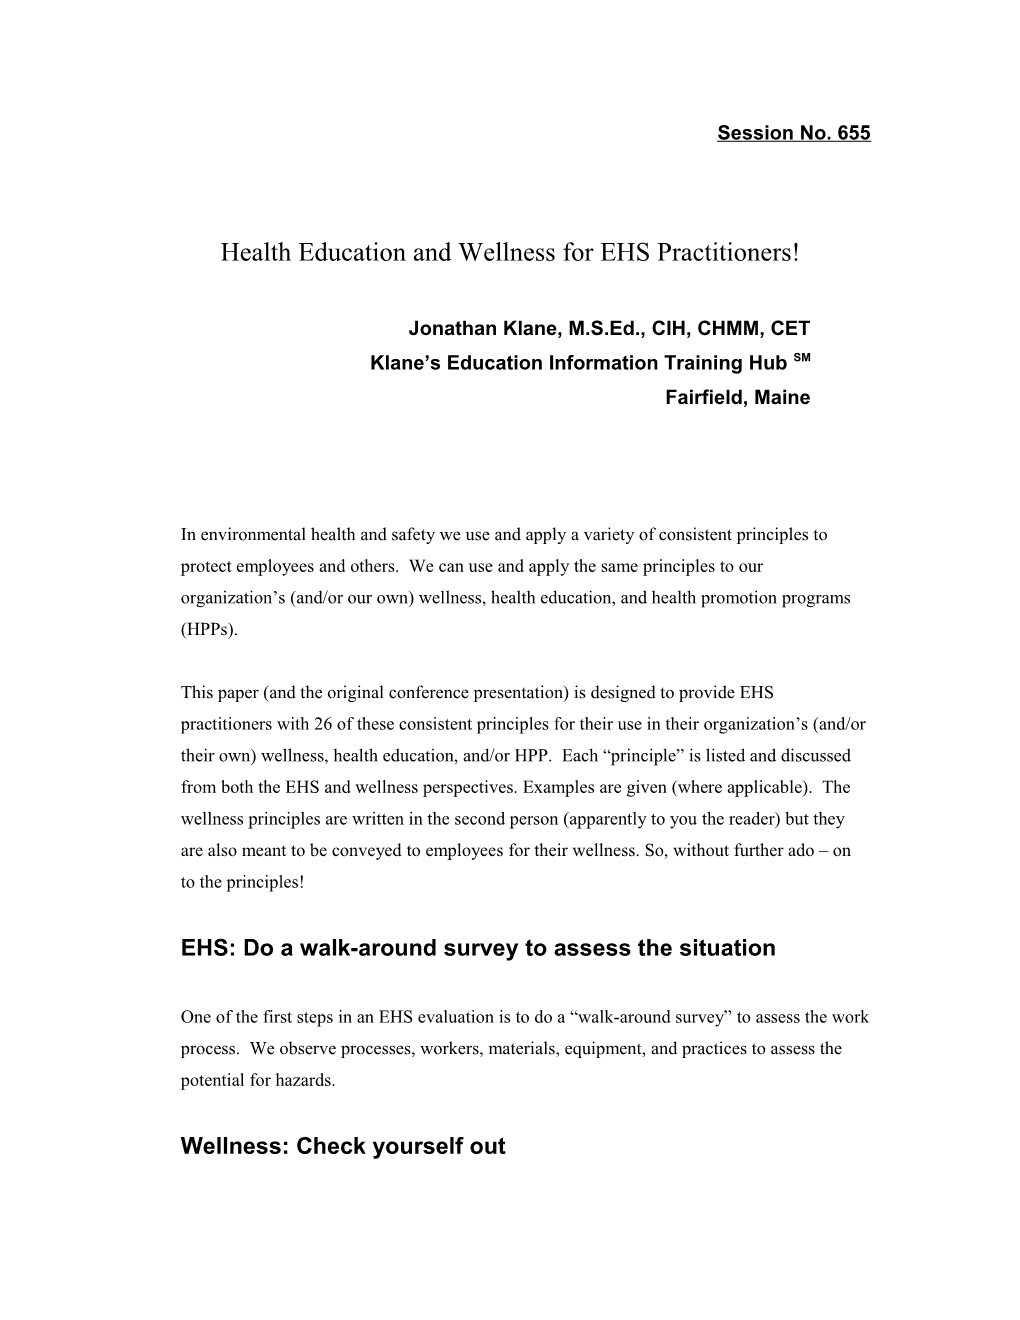 Health Education and Wellness for EHS Practitioners!